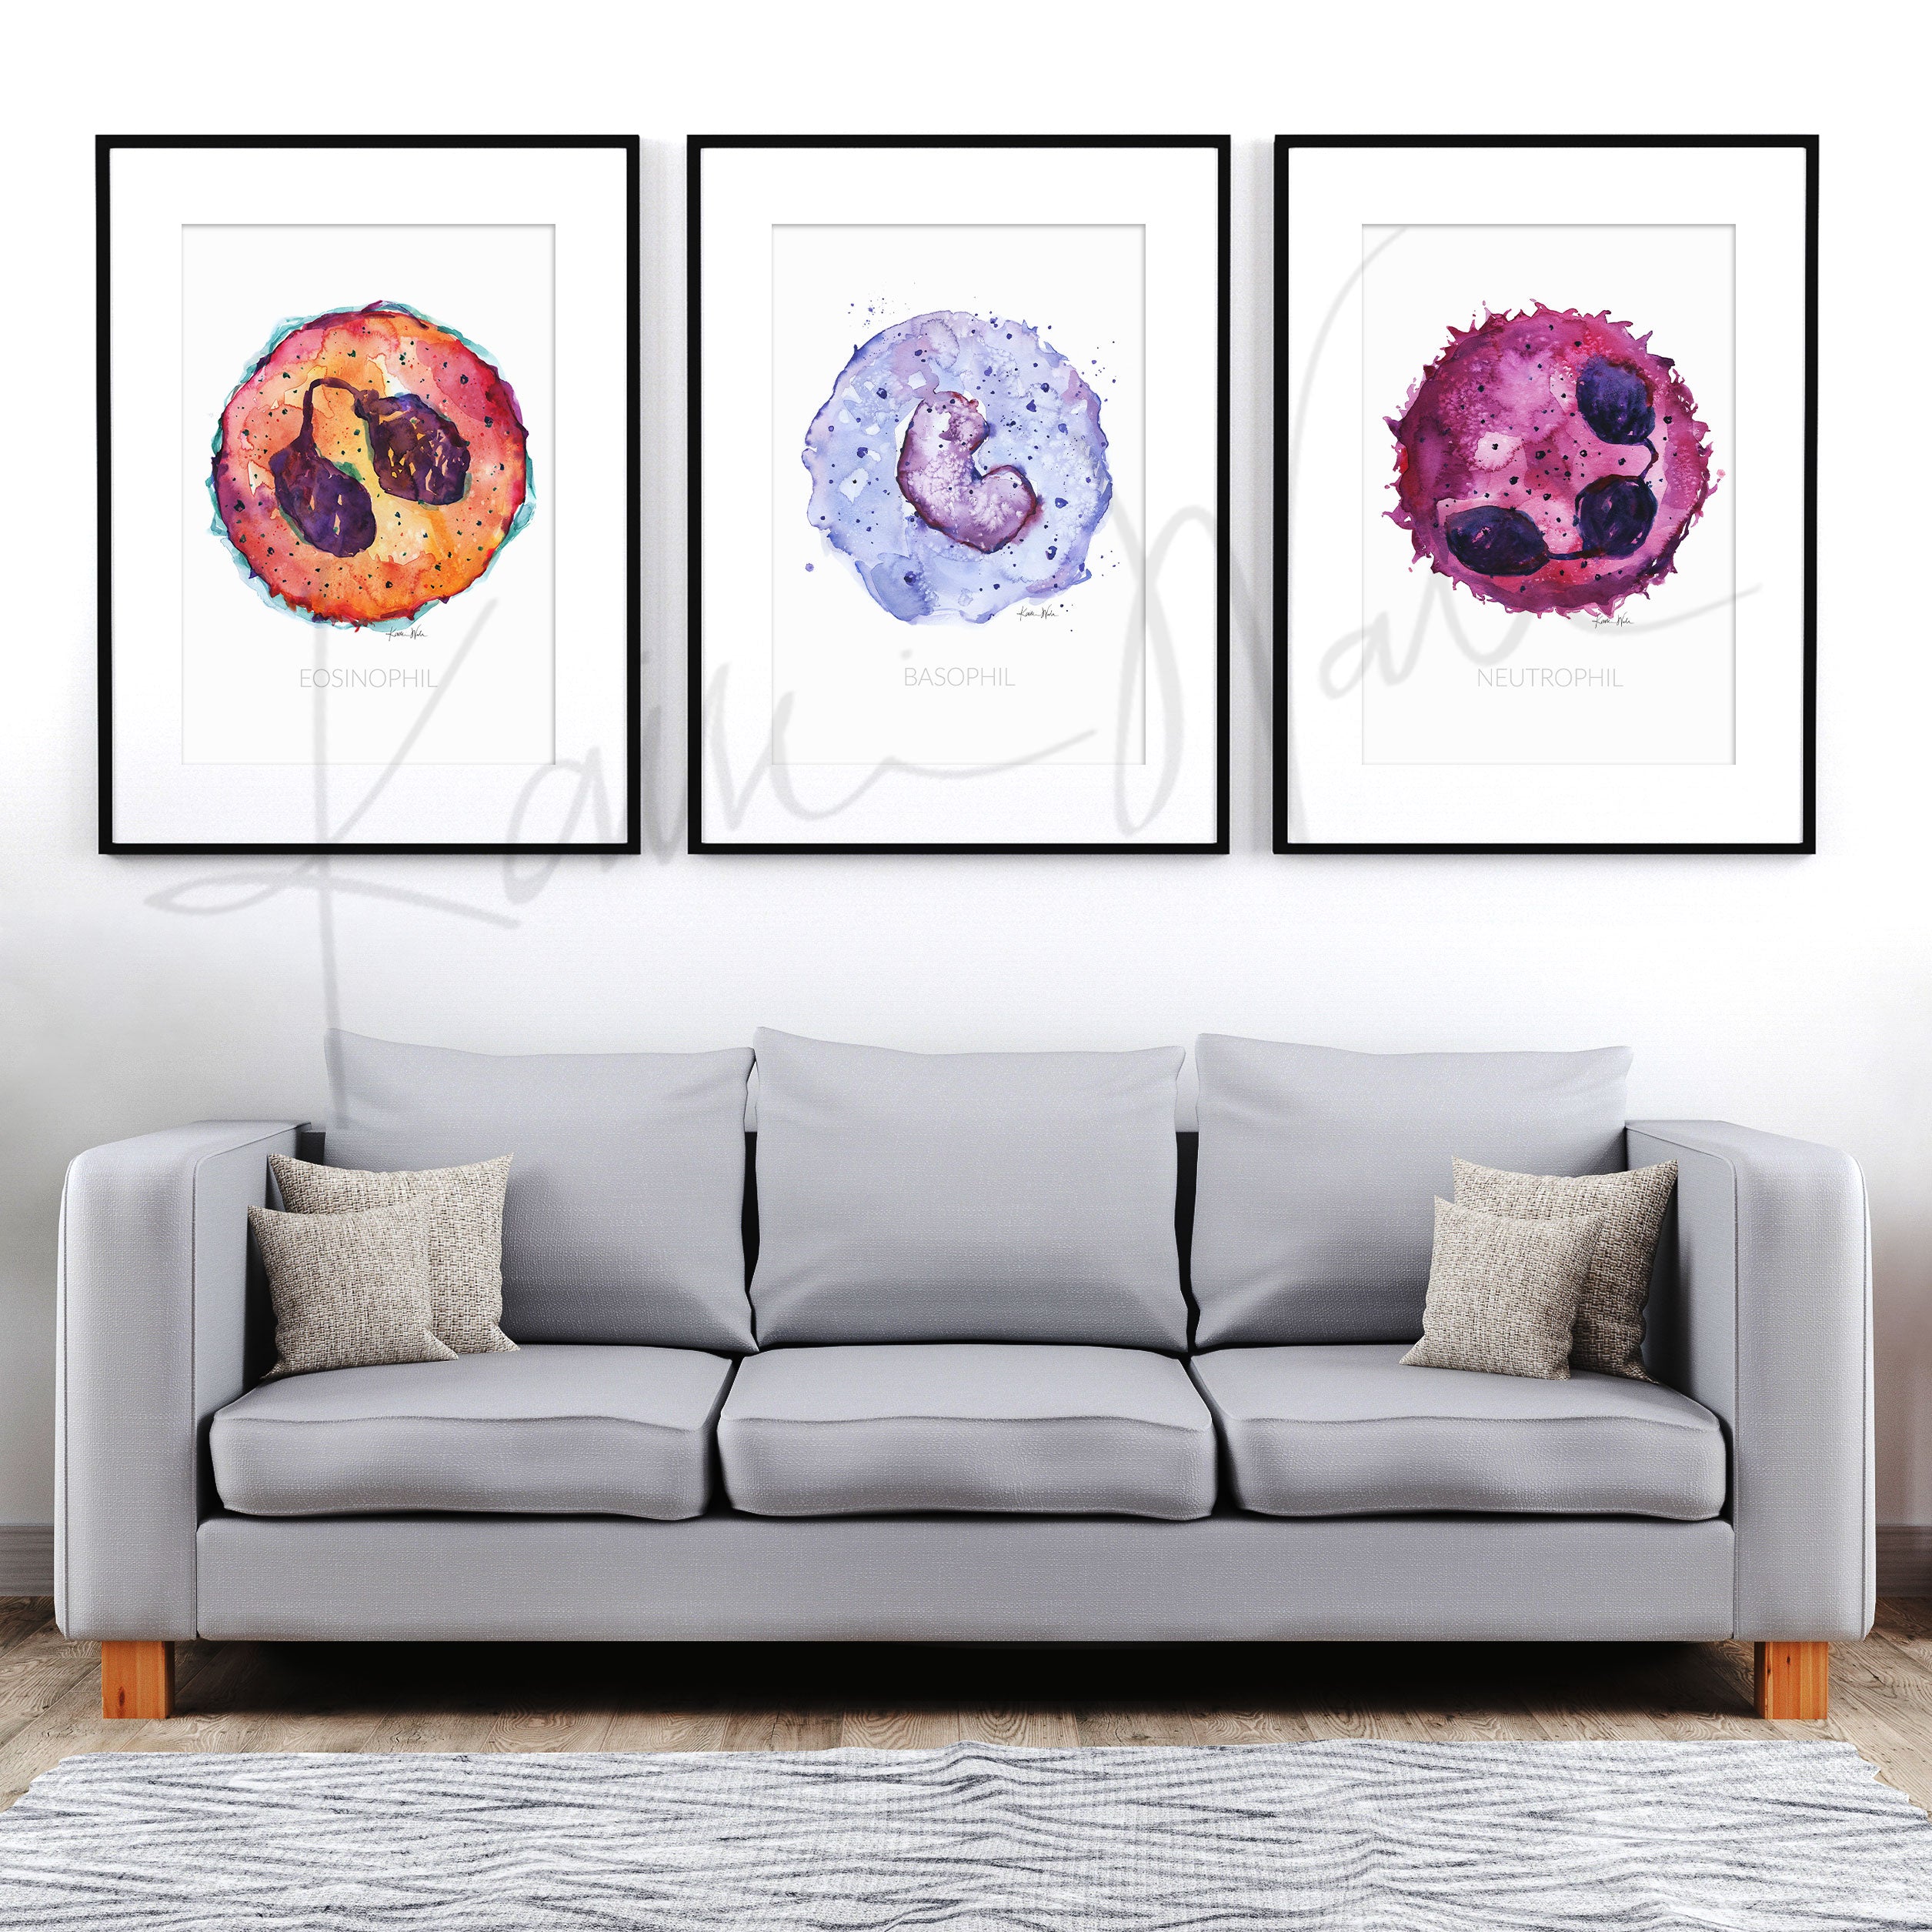 Framed watercolor painting set of different white blood cells. The painting is hanging over a gray couch.